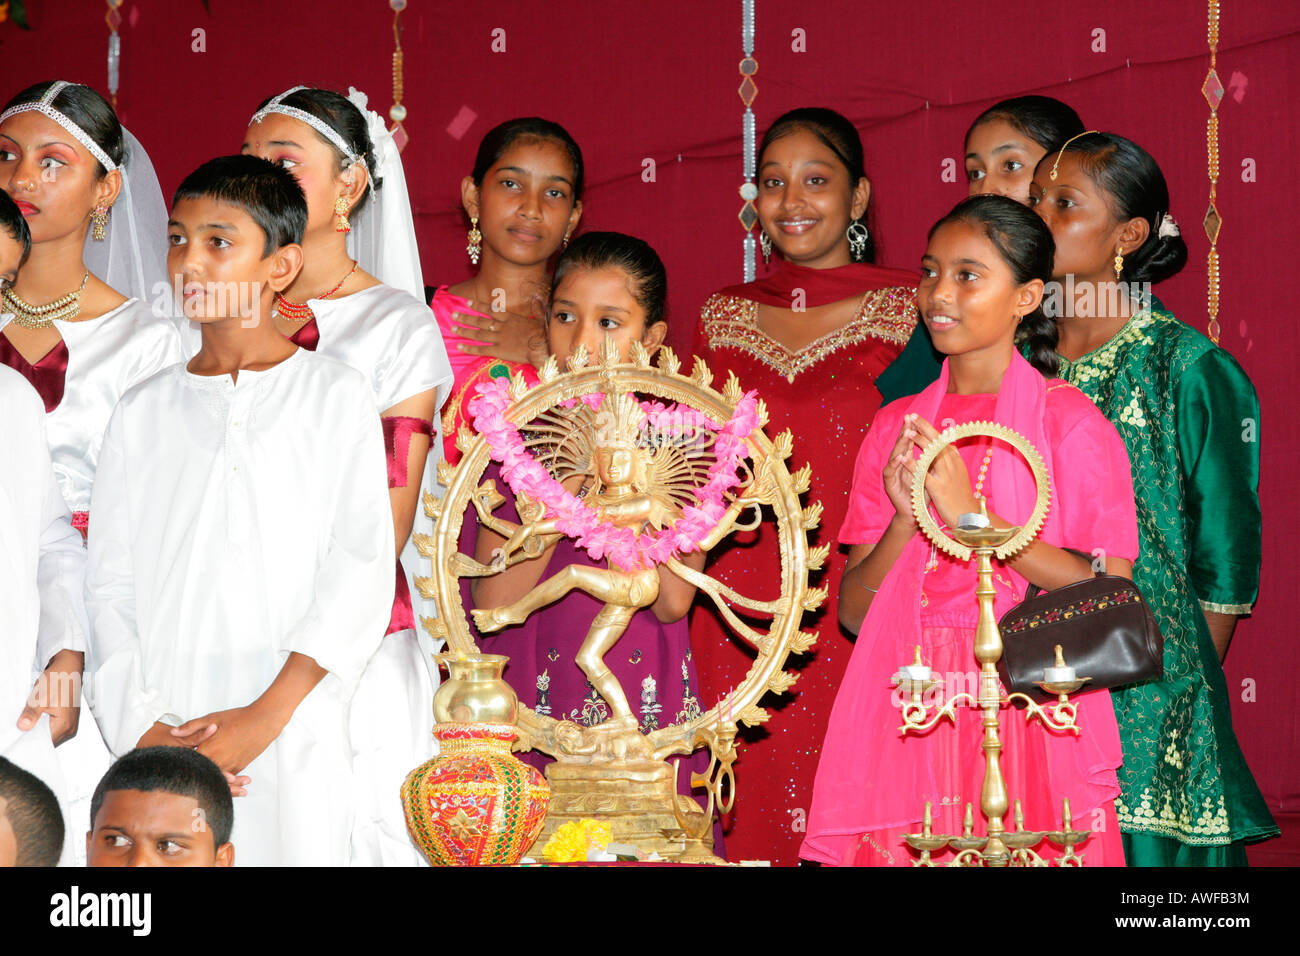 Children of Indian ethnicity with Shiva figure at a Hindu Festival in ...